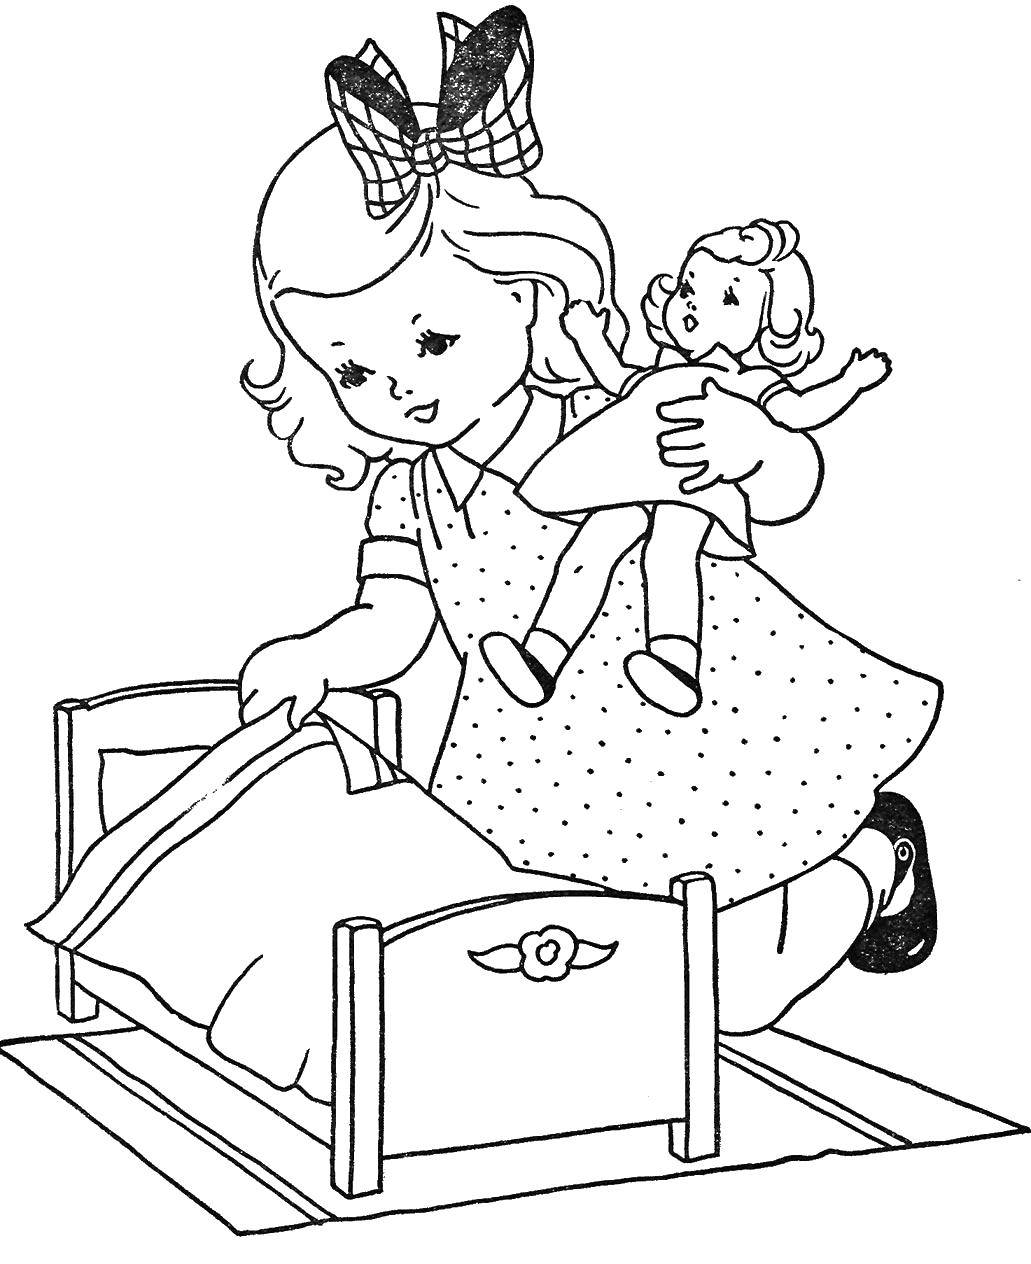 Coloring The girl puts the doll to sleep. Category the clothes and the doll. Tags:  Toy, doll.